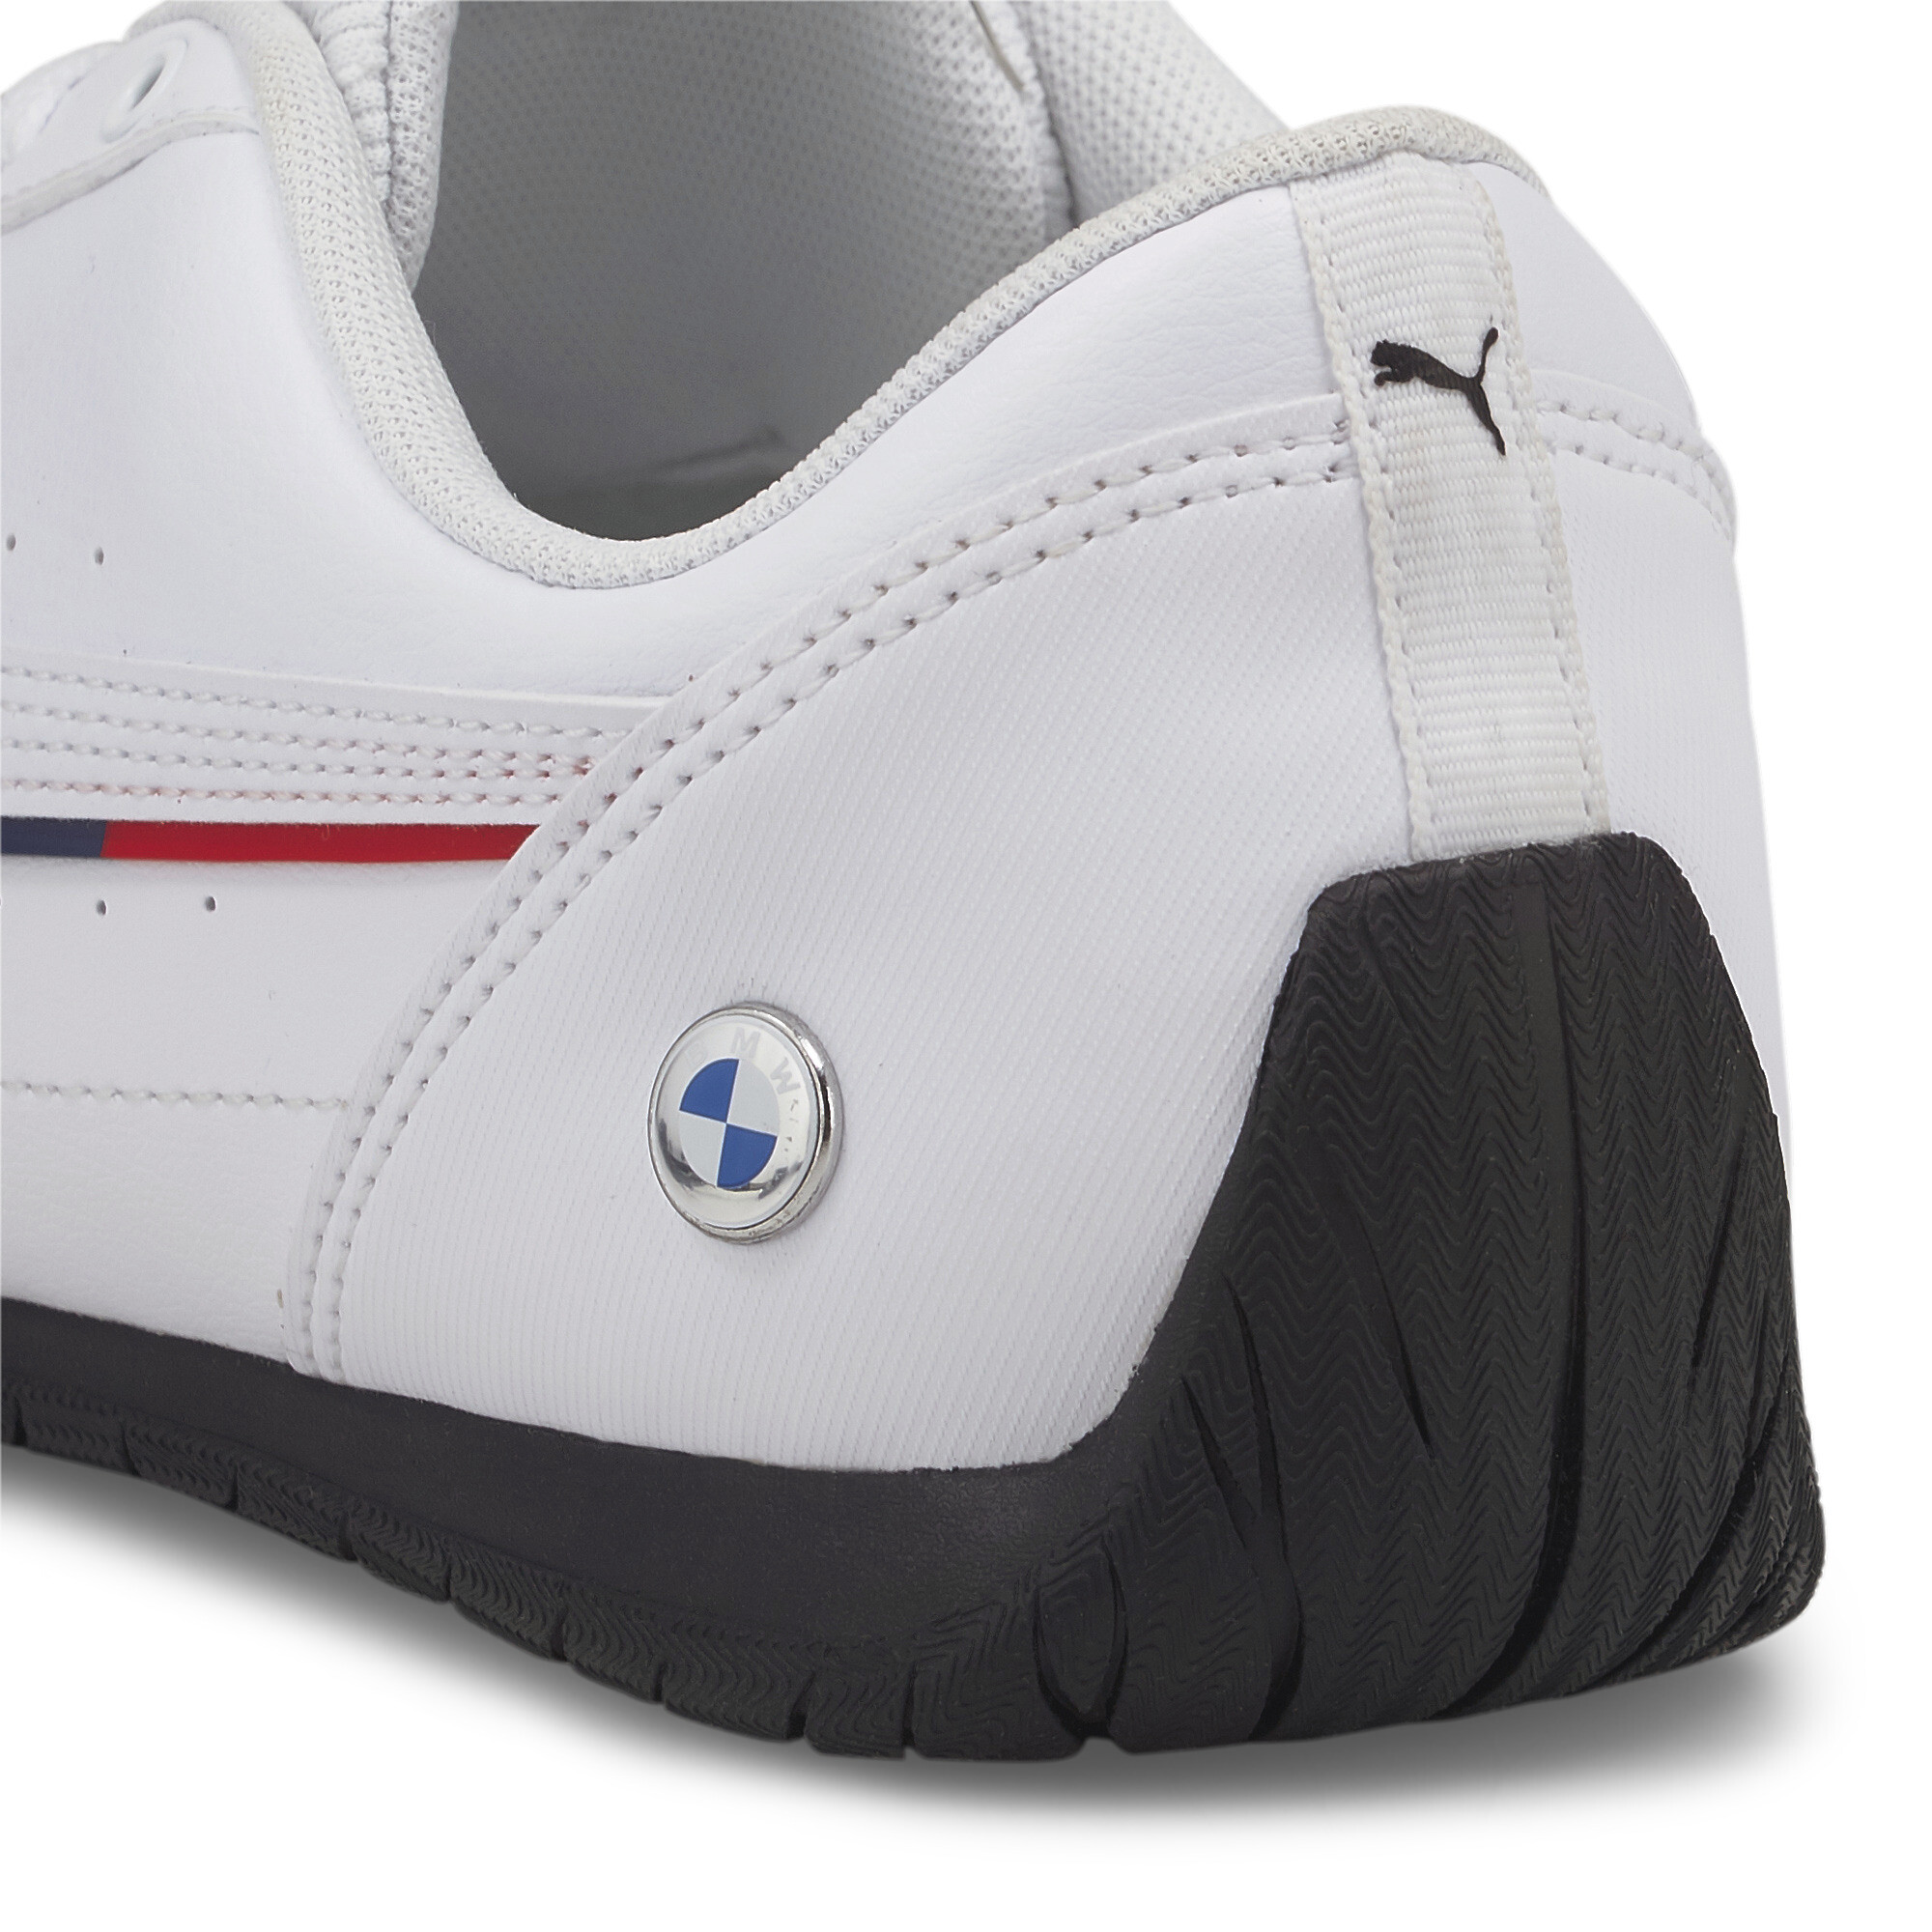 Puma BMW M Motorsport Neo Cat Racing Shoes, White, Size 37.5, Shoes